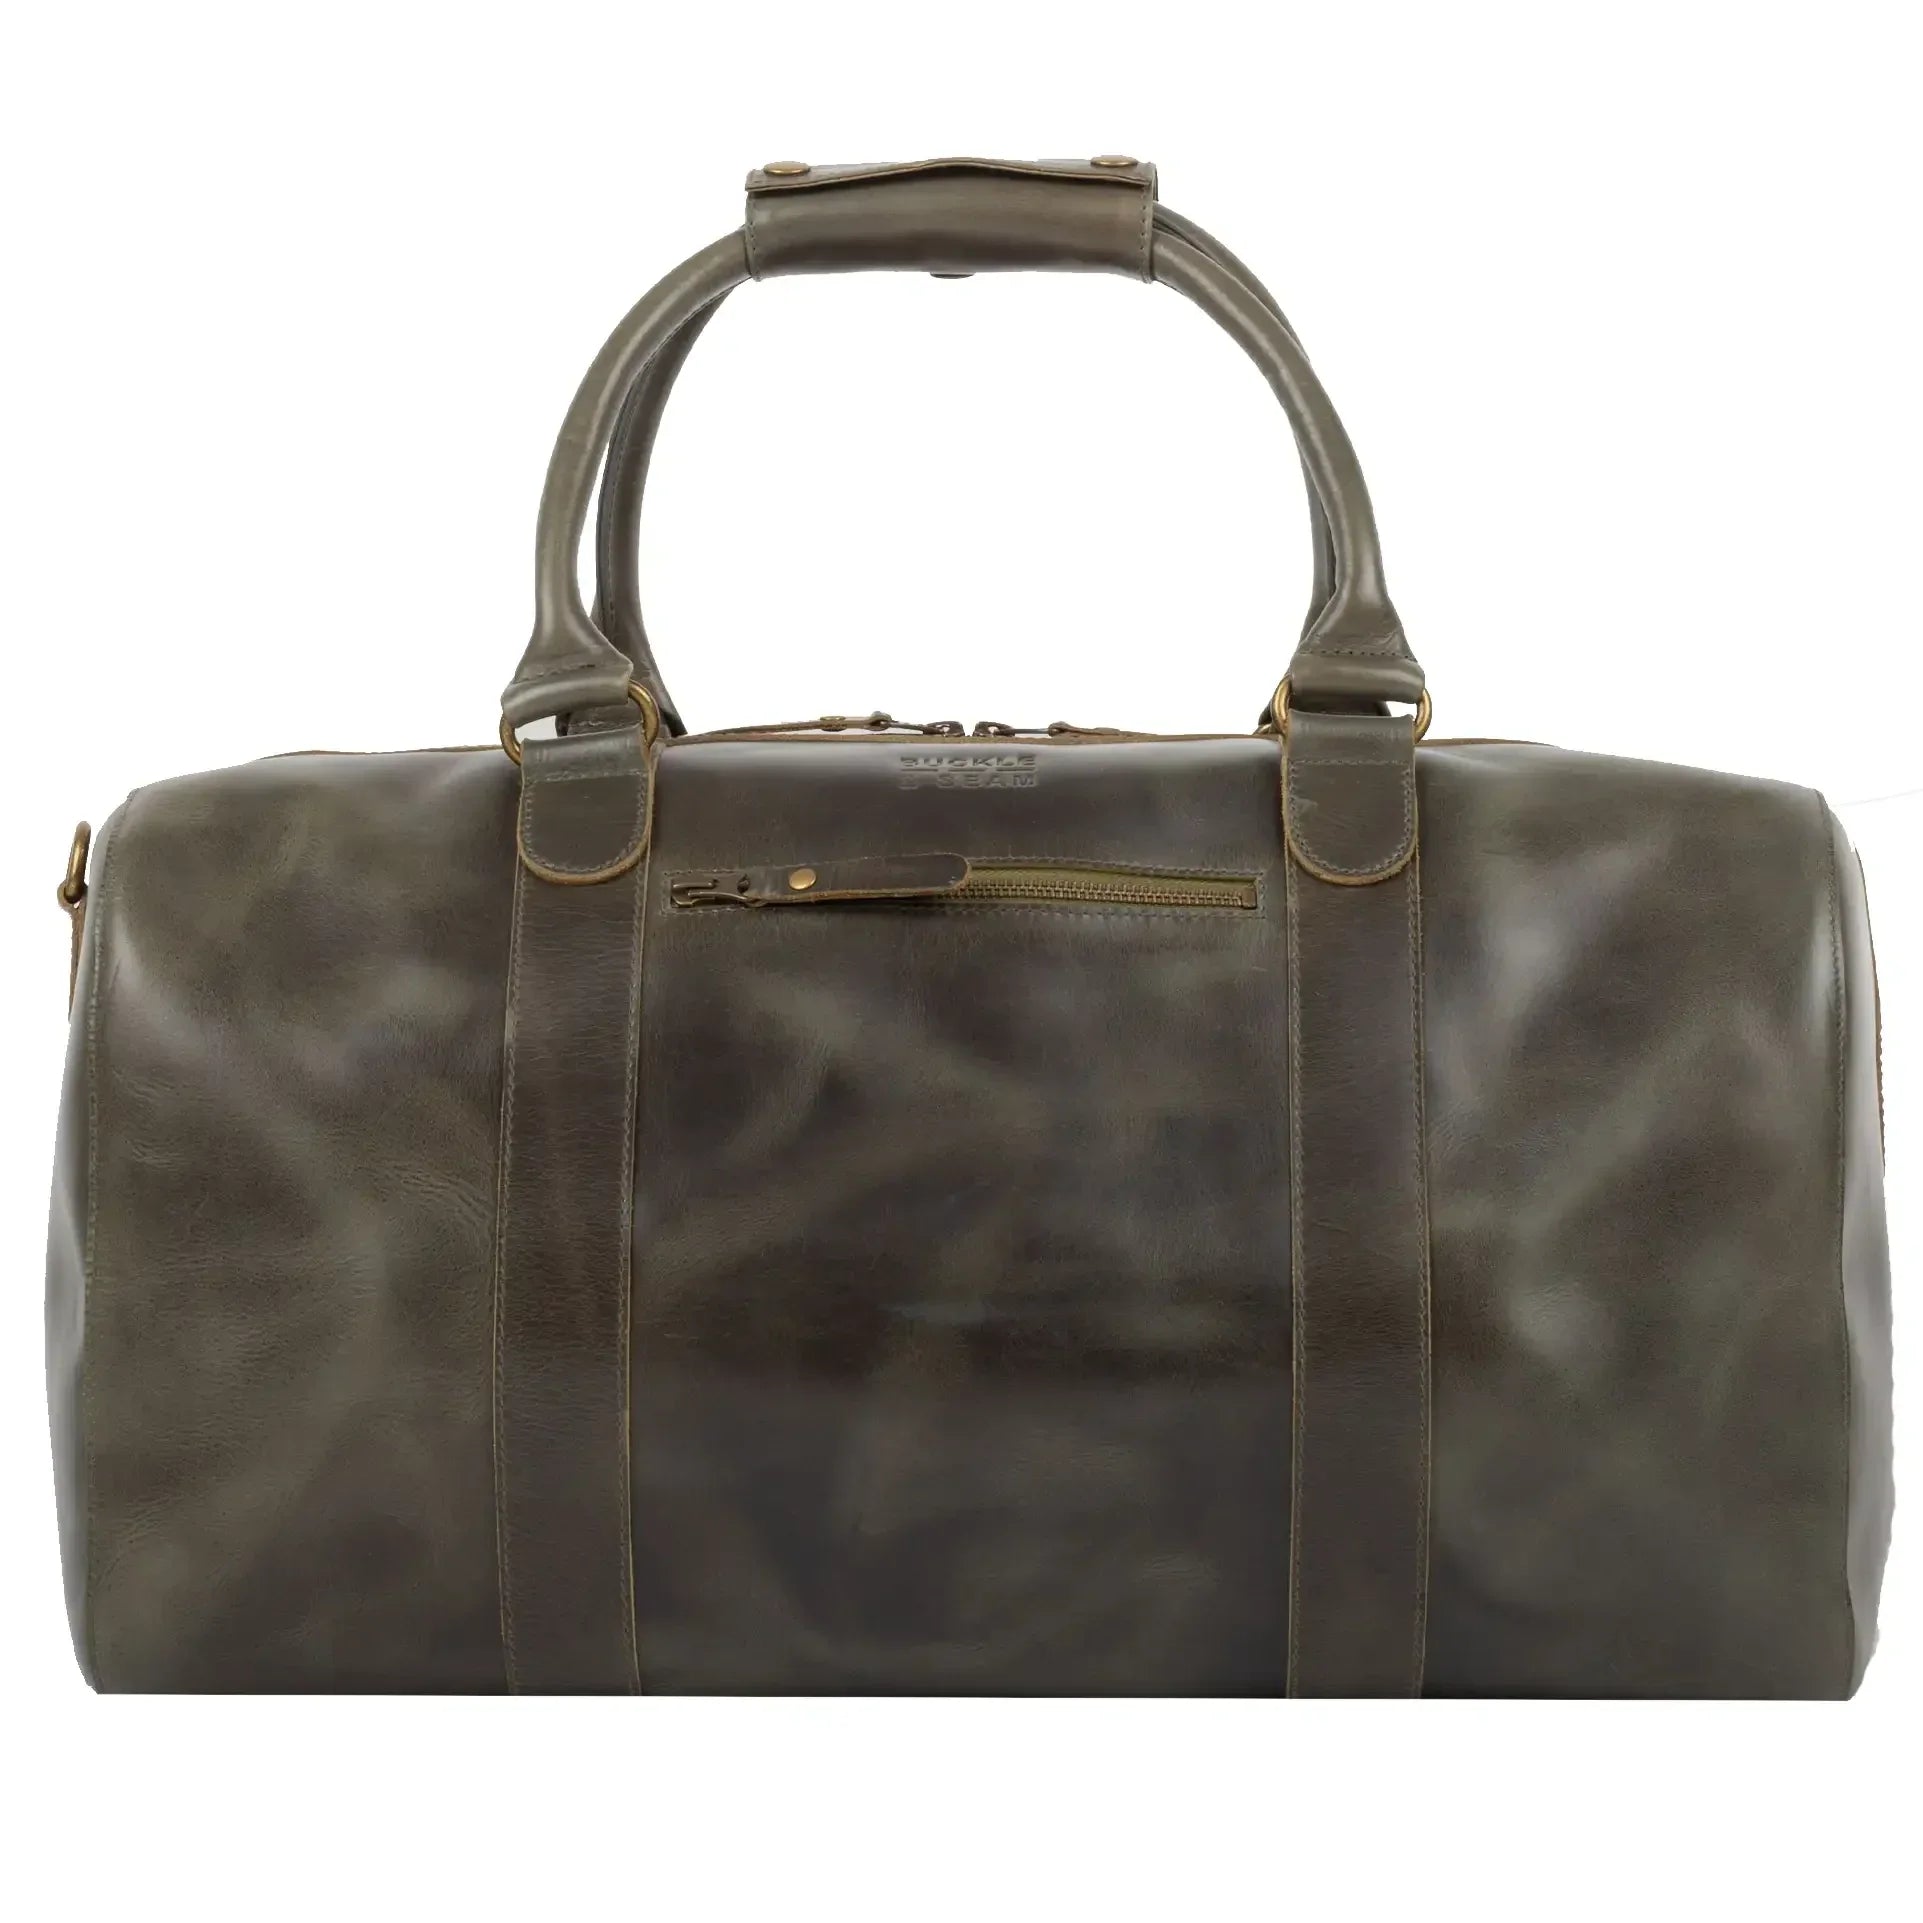 Sac week-end boucle et couture Willow 50 cm - Olive